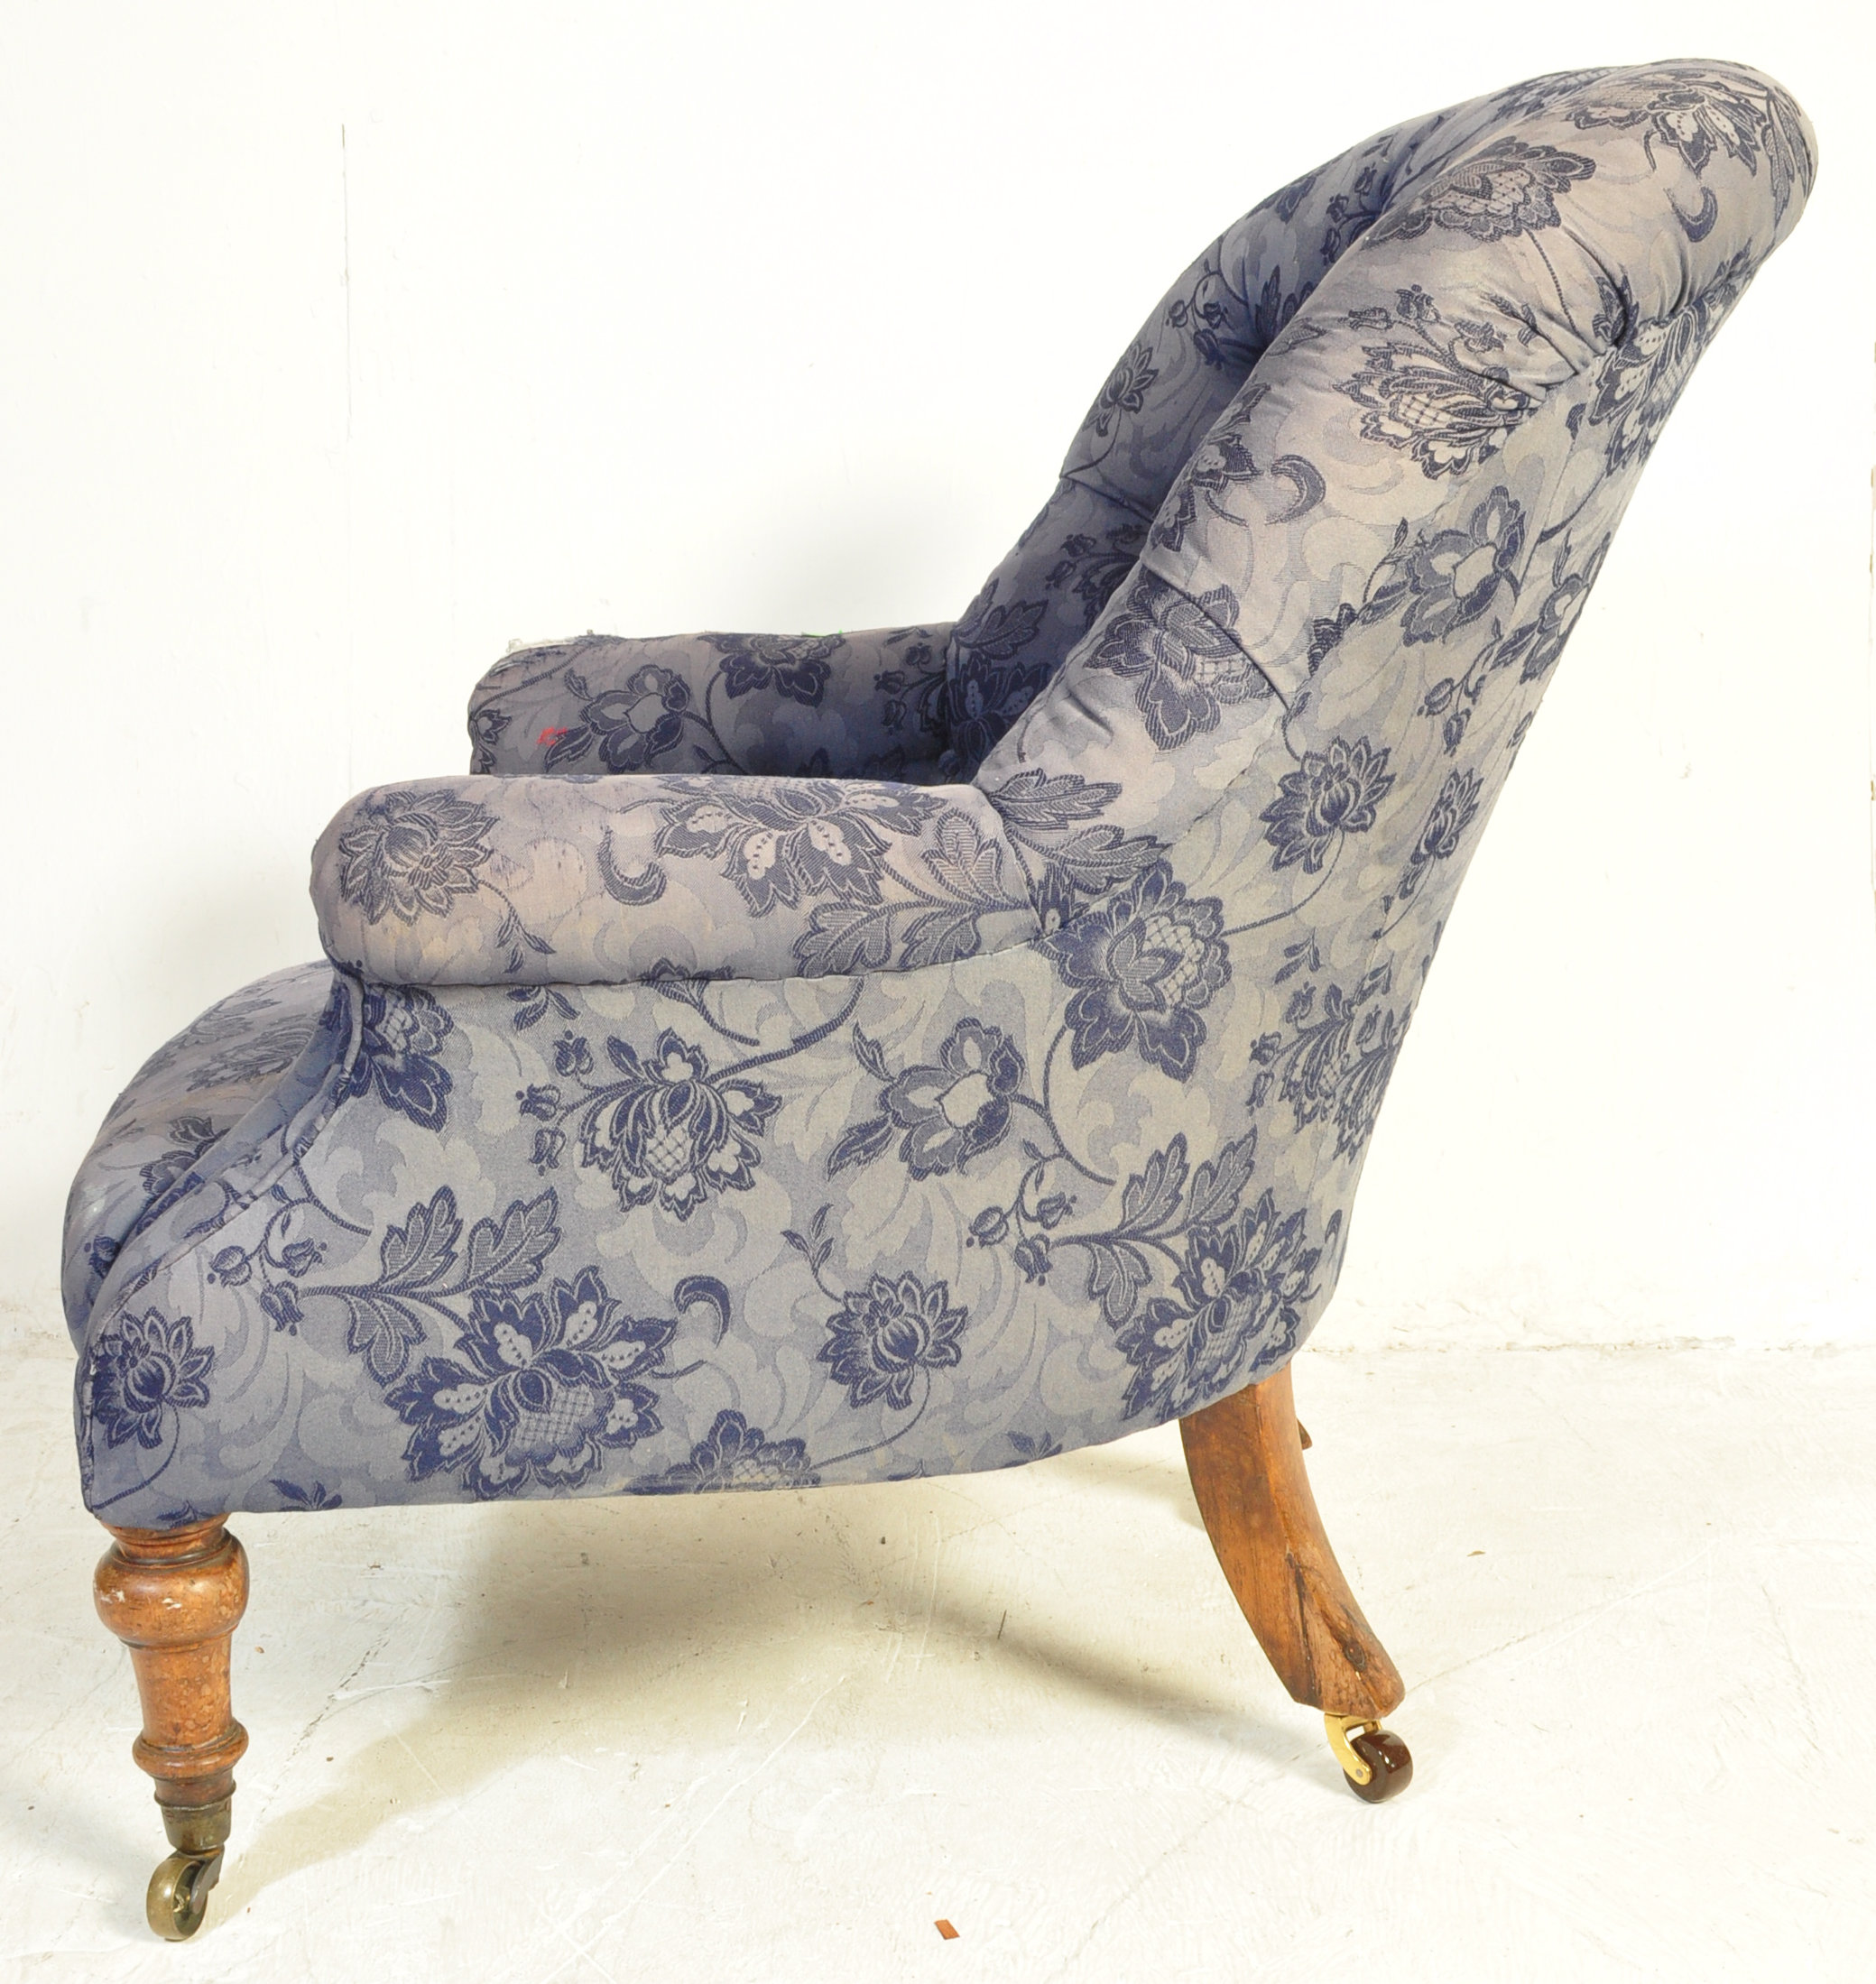 VICTORIAN 19TH CENTURY UPHOLSTERED ARMCHAIR - Image 6 of 6